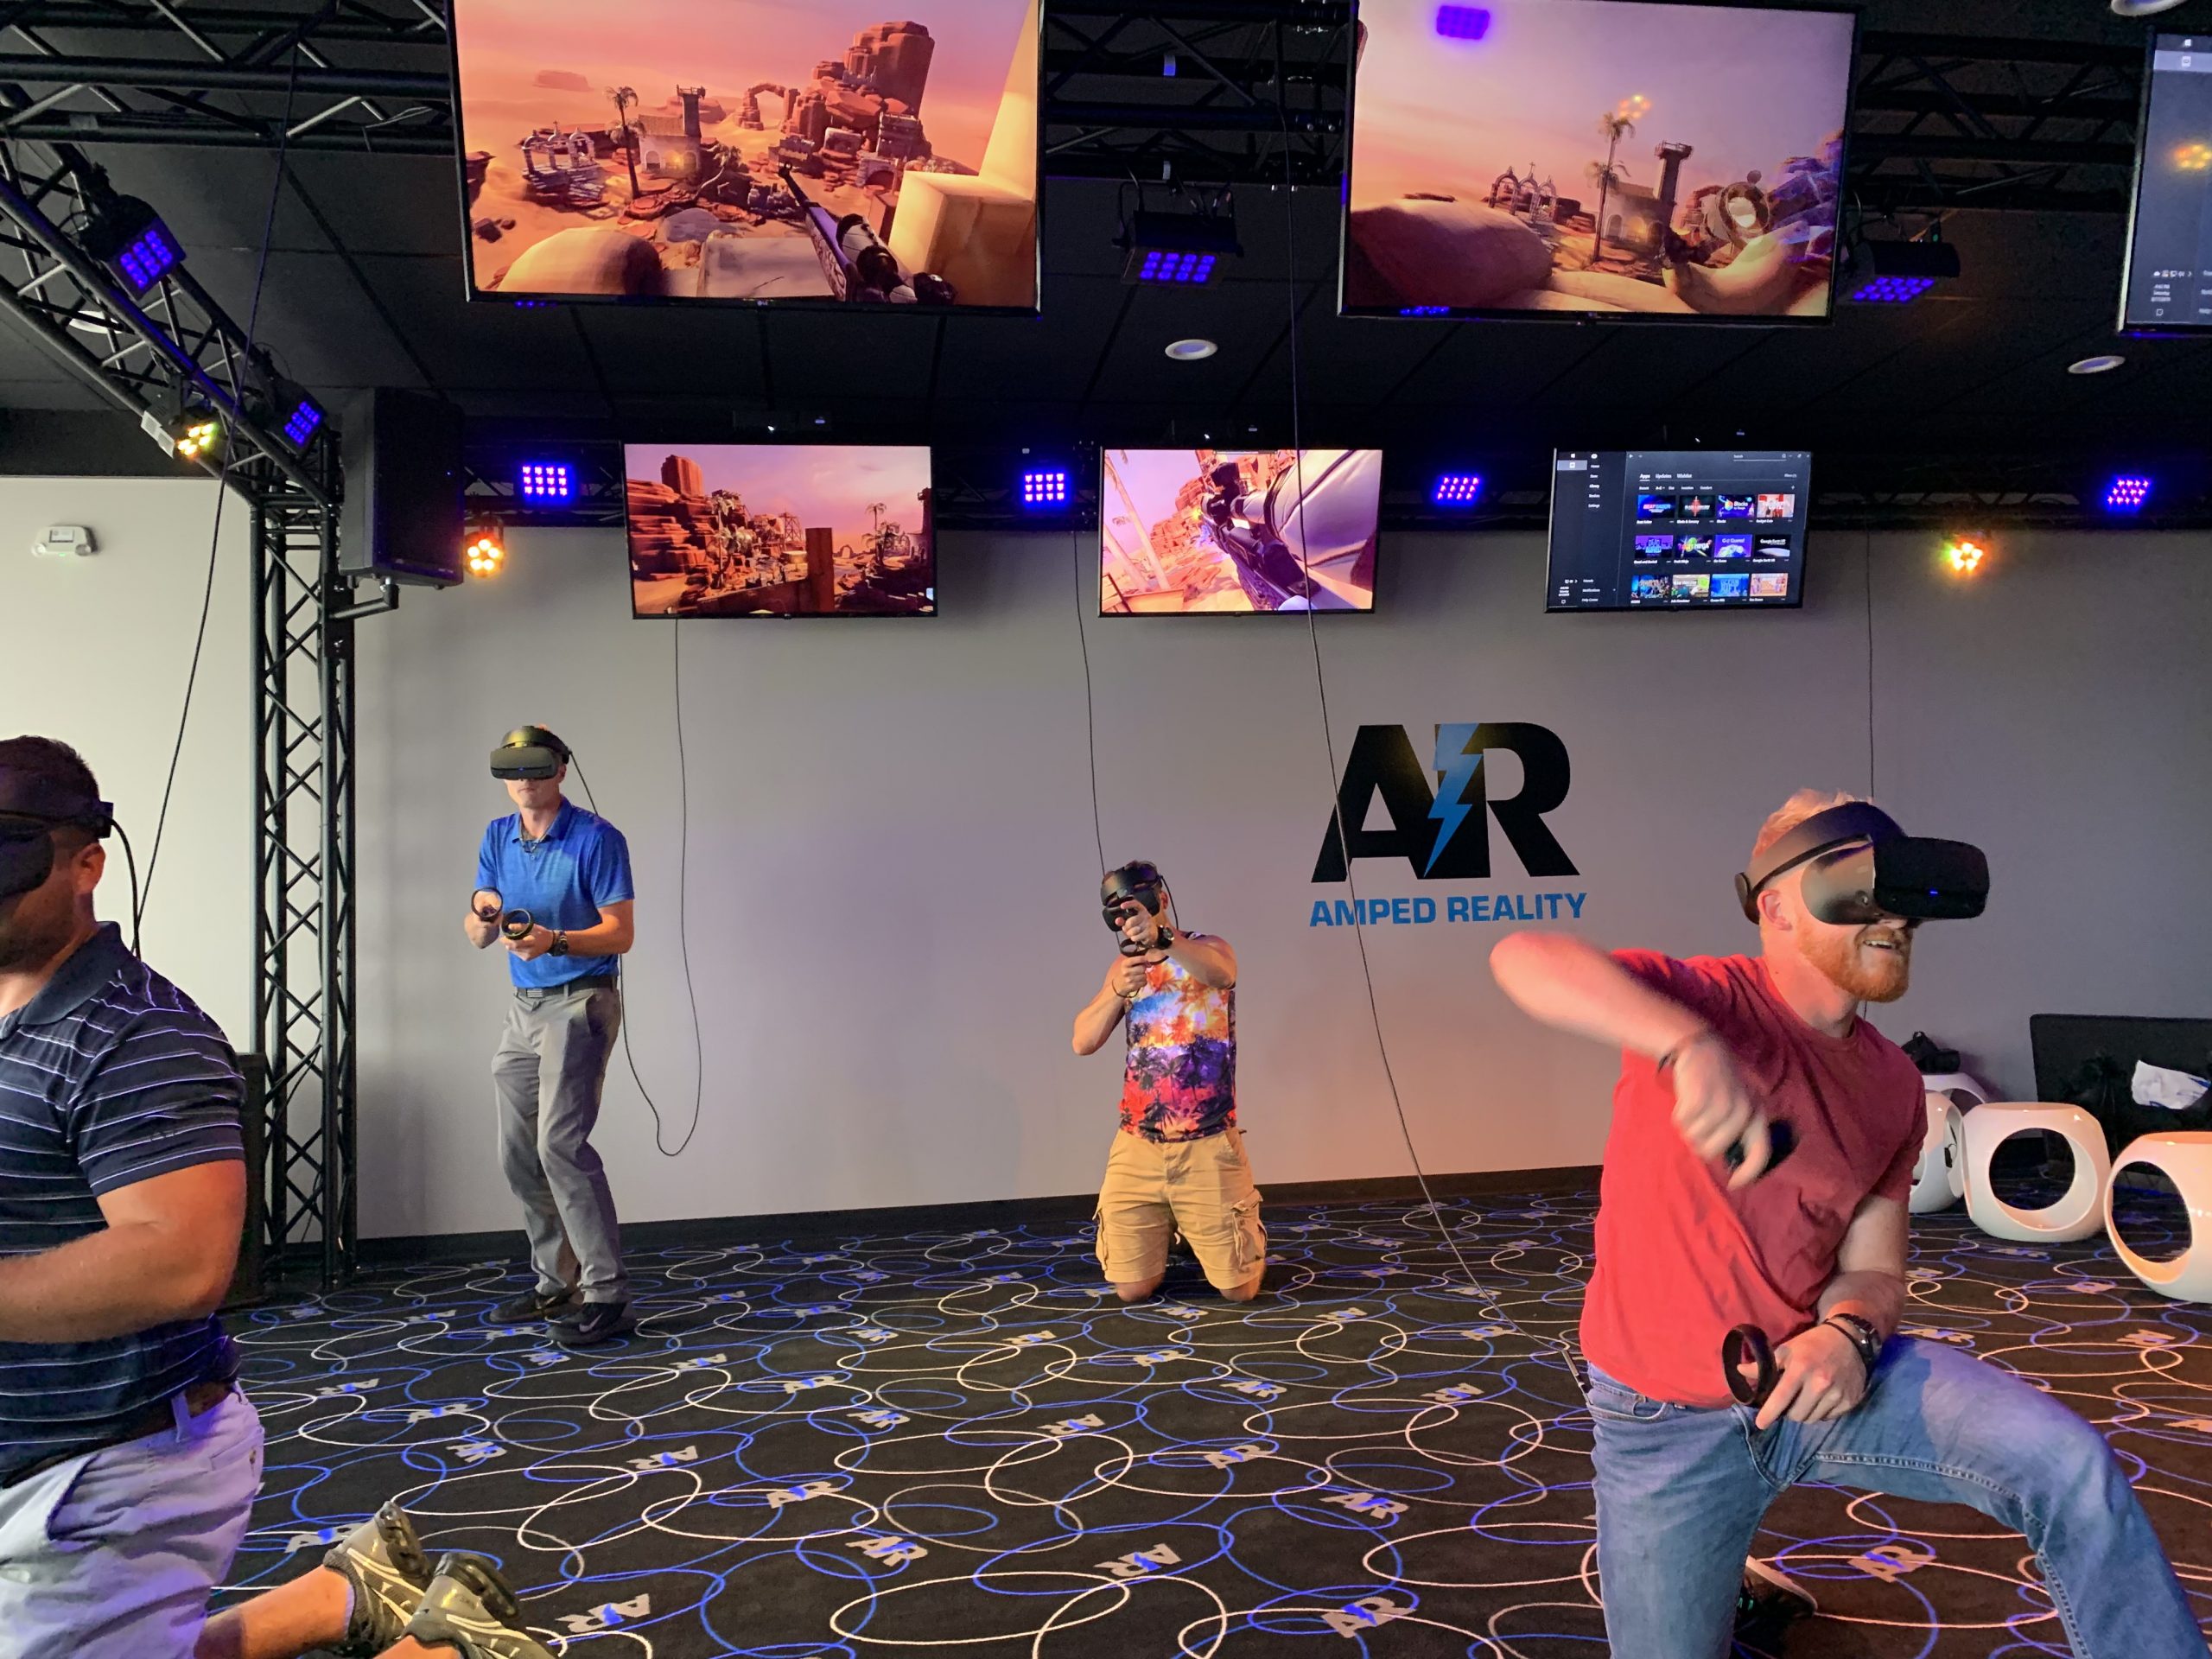 Men playing virtual reality games at Amped Reality in Grand Rapids Michigan.